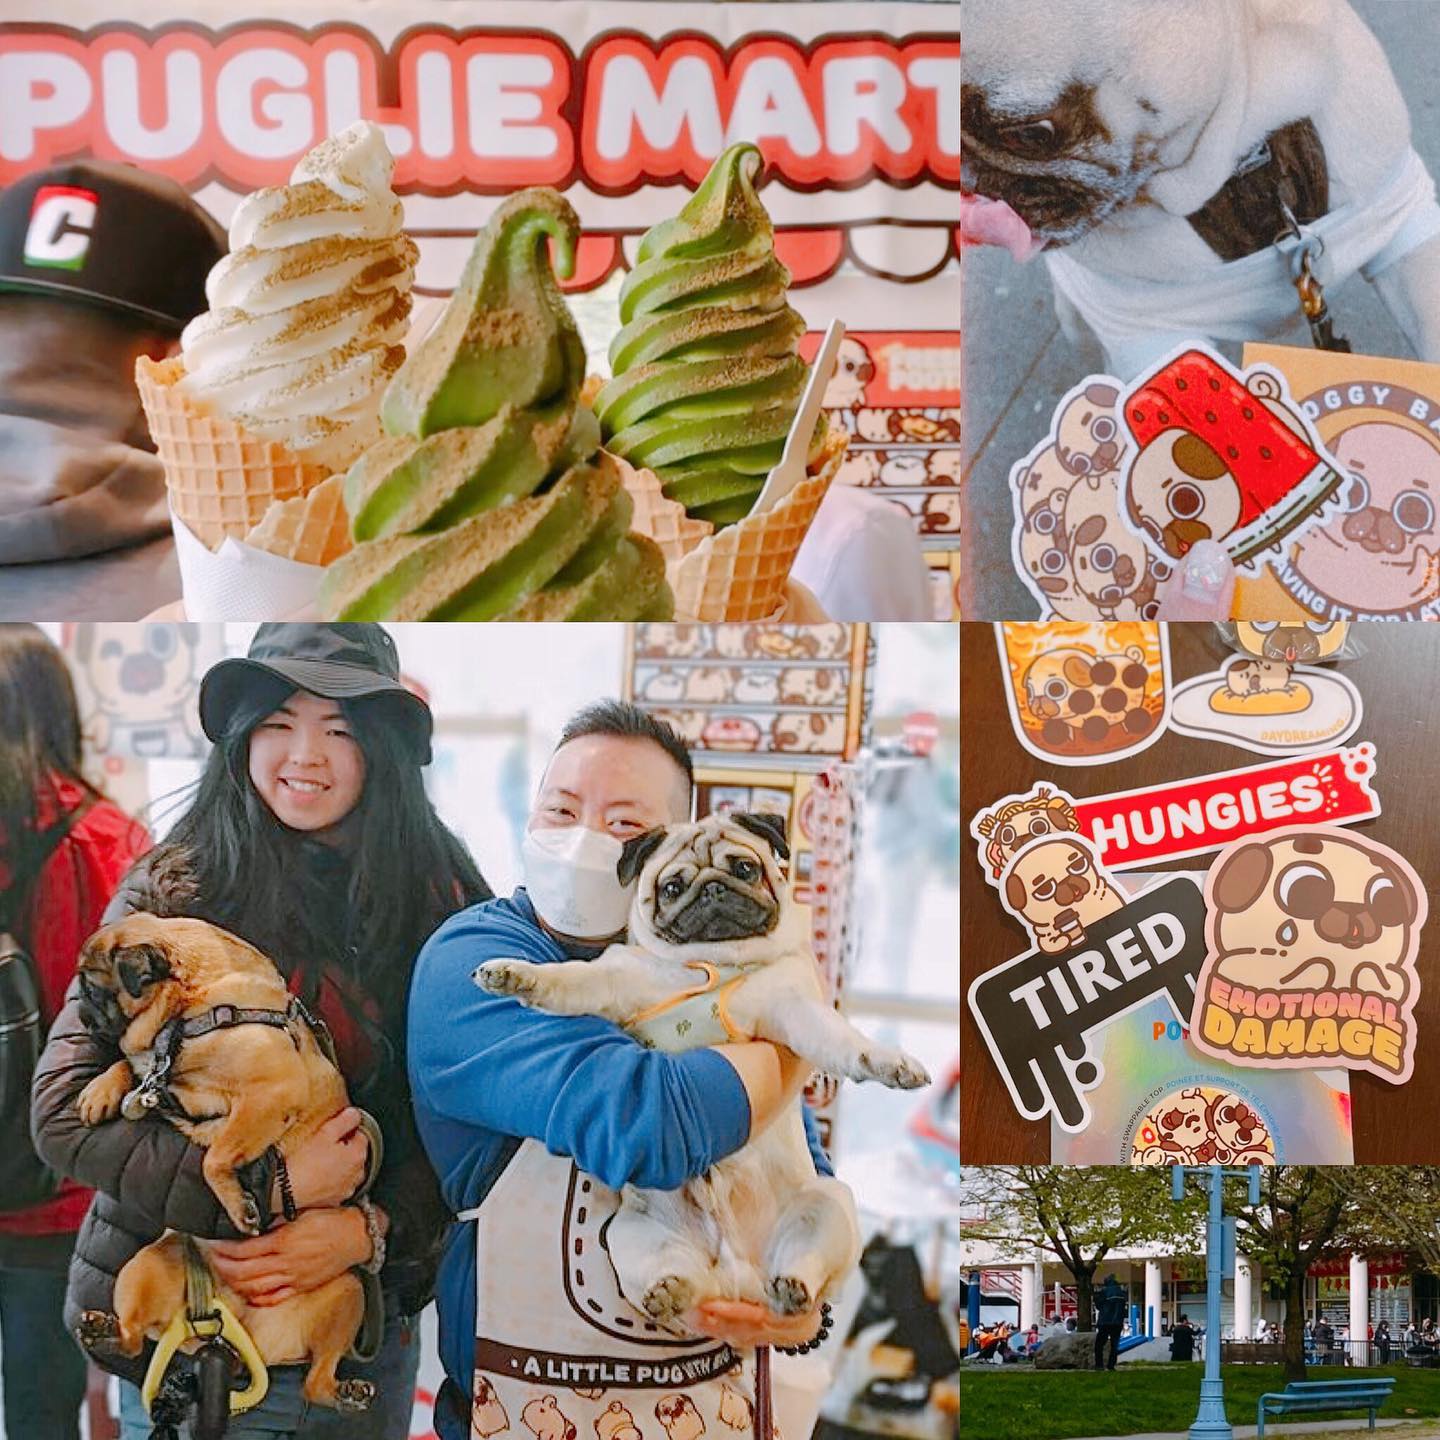 Collage of photos from Matcha Cafe Maiko customers, such as 3 soft serve cones in front of the Puglie Mart sign, Miss Olive the pug being held by her owner beside Euge who is holding Tuck Tuck Pug, and some Puglie stickers purchased by other customers.